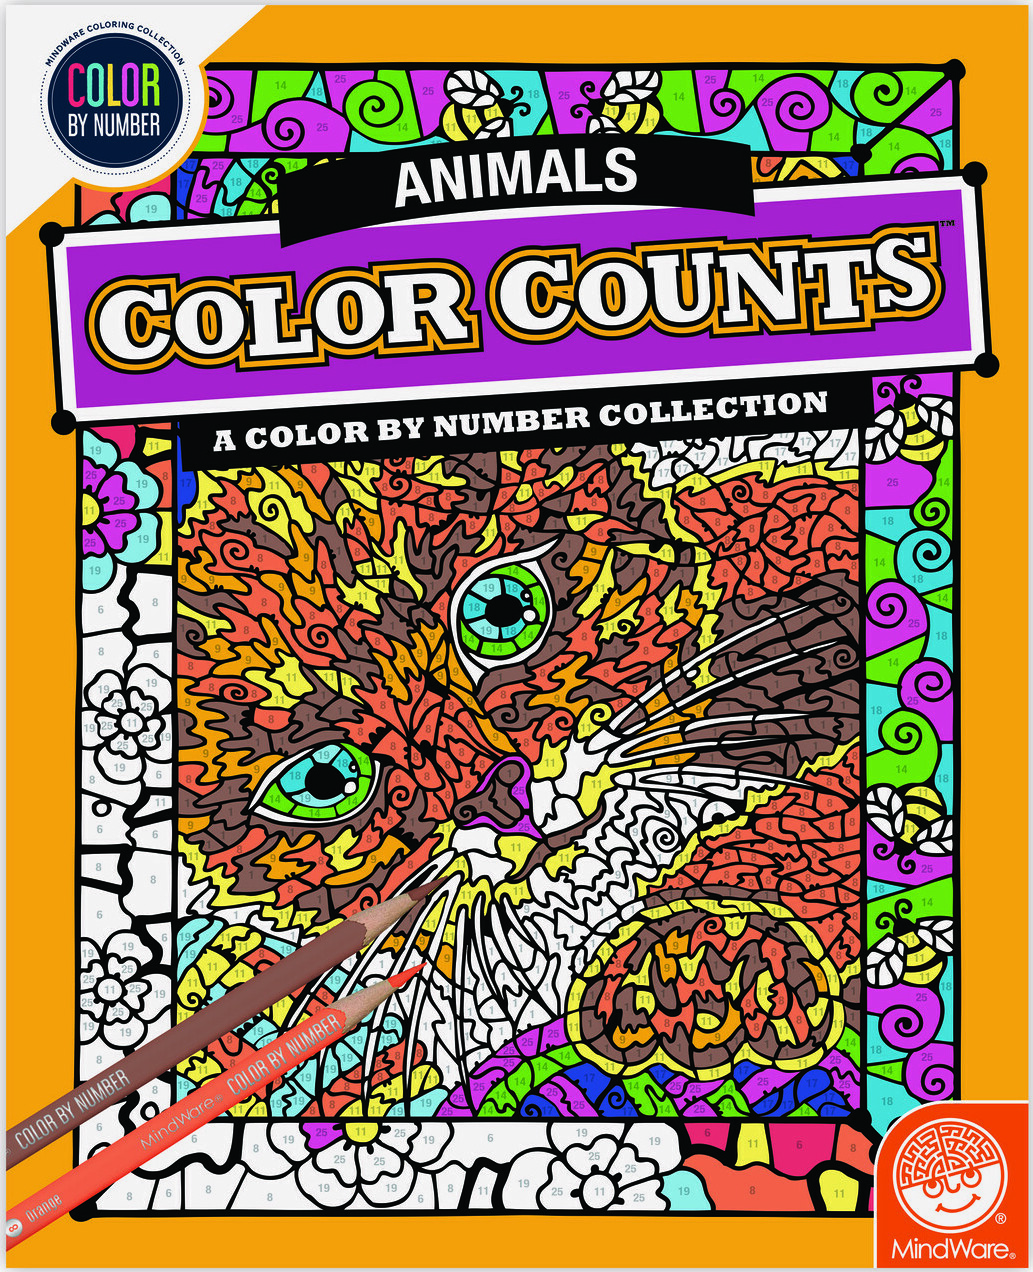 Cbn: Color Counts Animals